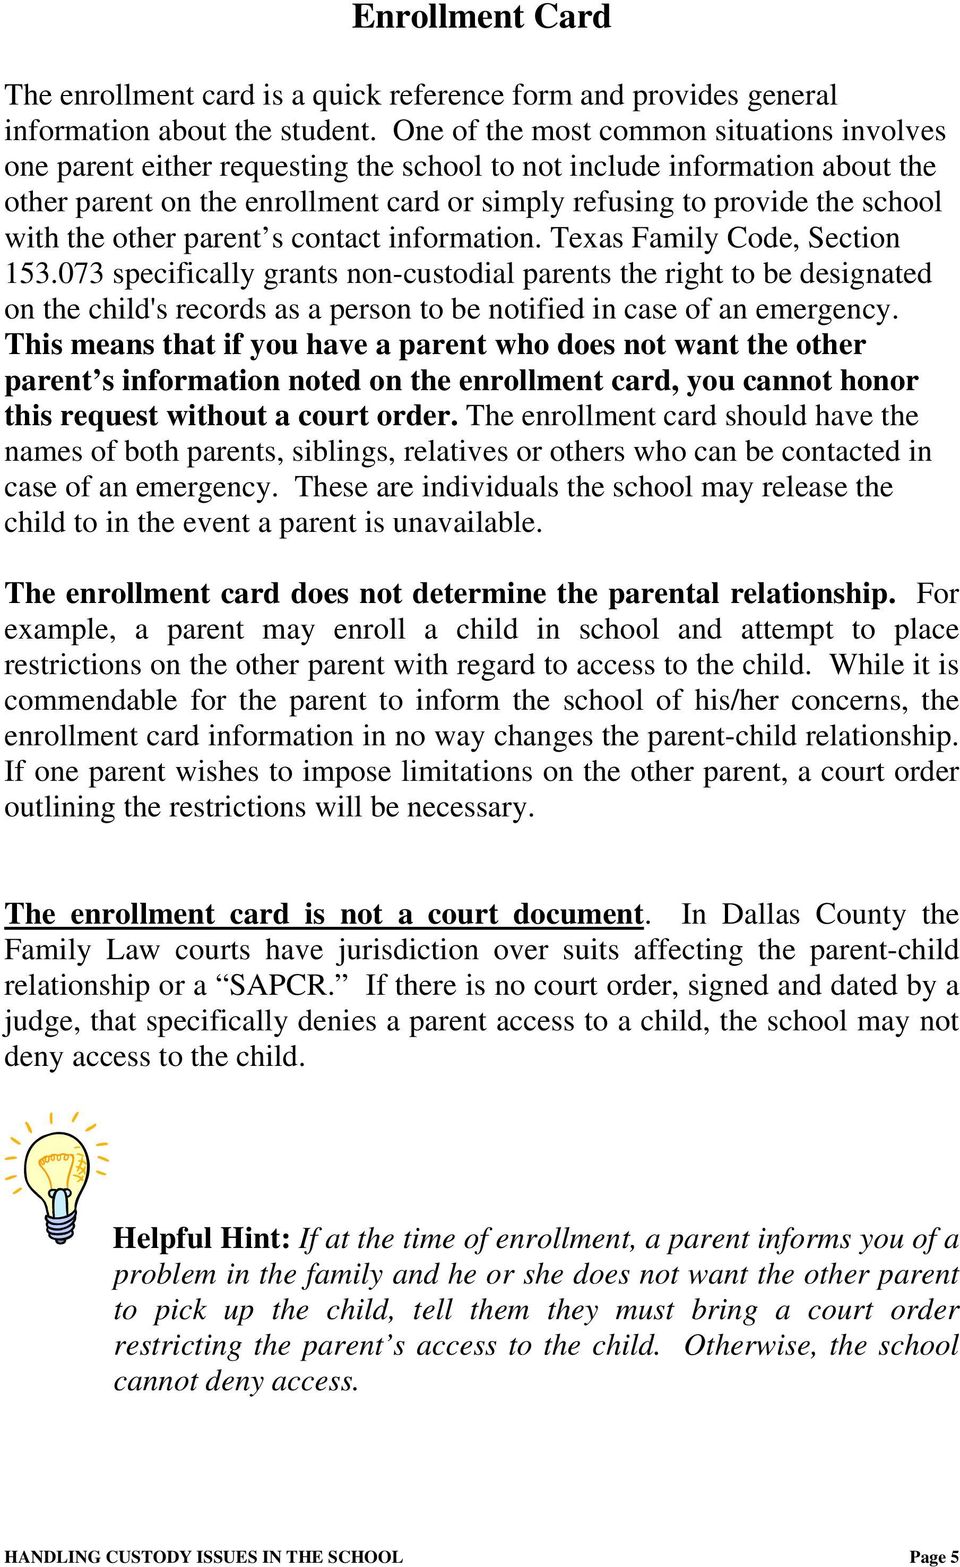 with the other parent s contact information. Texas Family Code, Section 153.